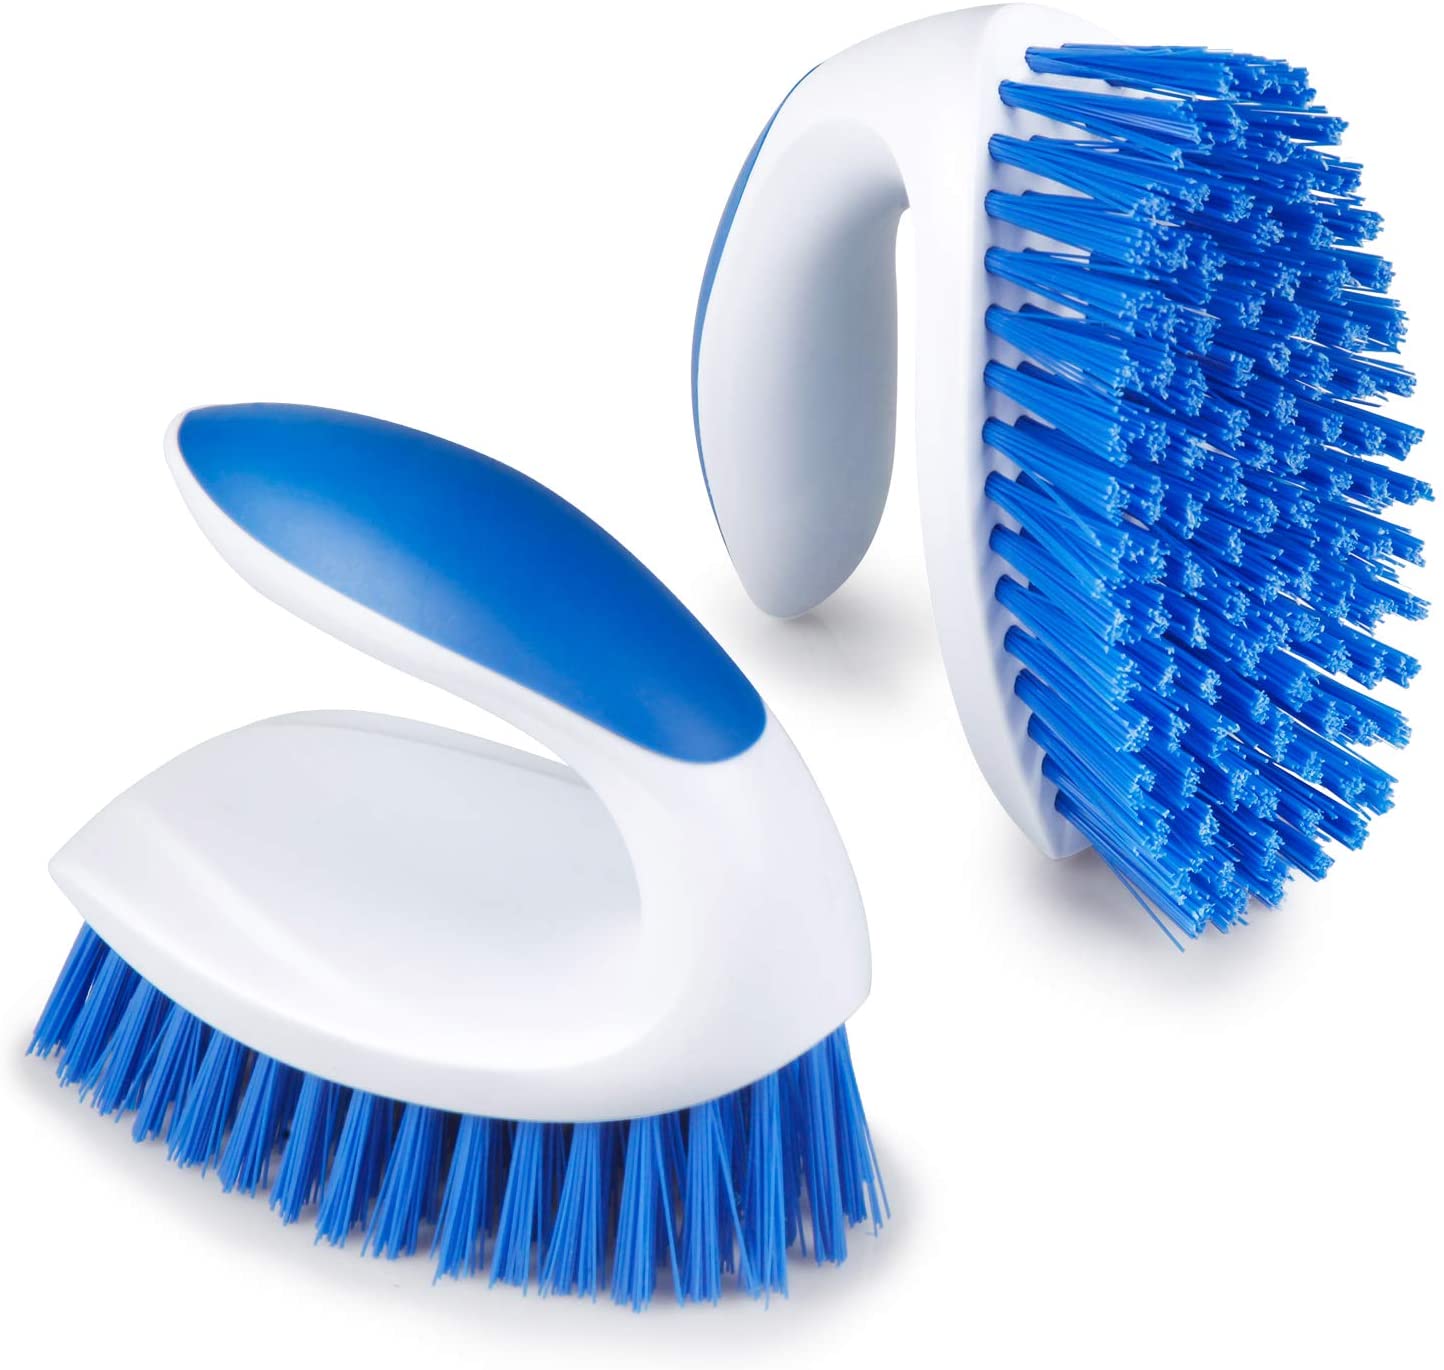 Scrub Brushes for Cleaning Shower – Ecommerce Store